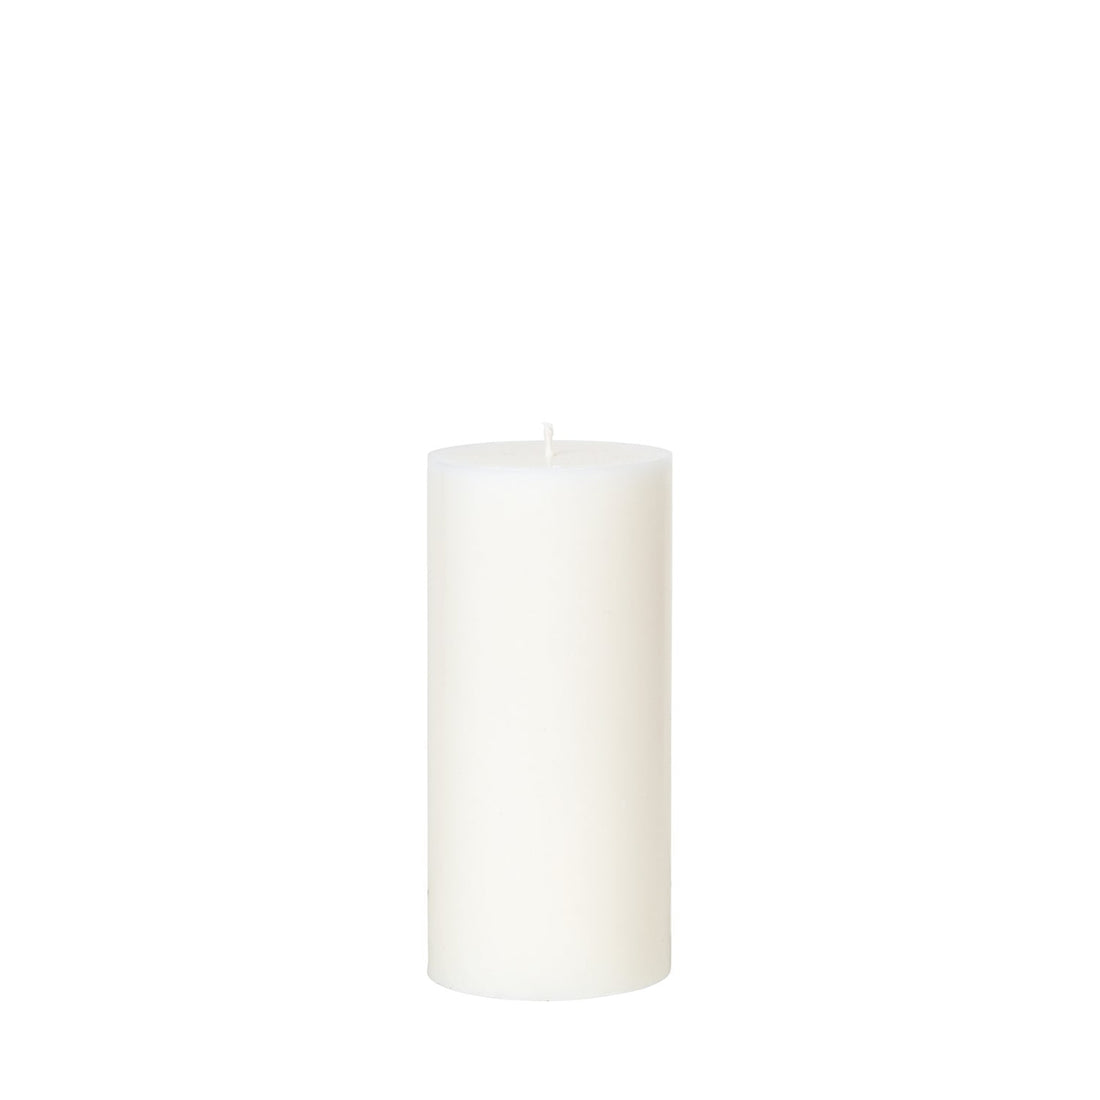 Bröste Stearin Candle - Pure White - The Flower Crate